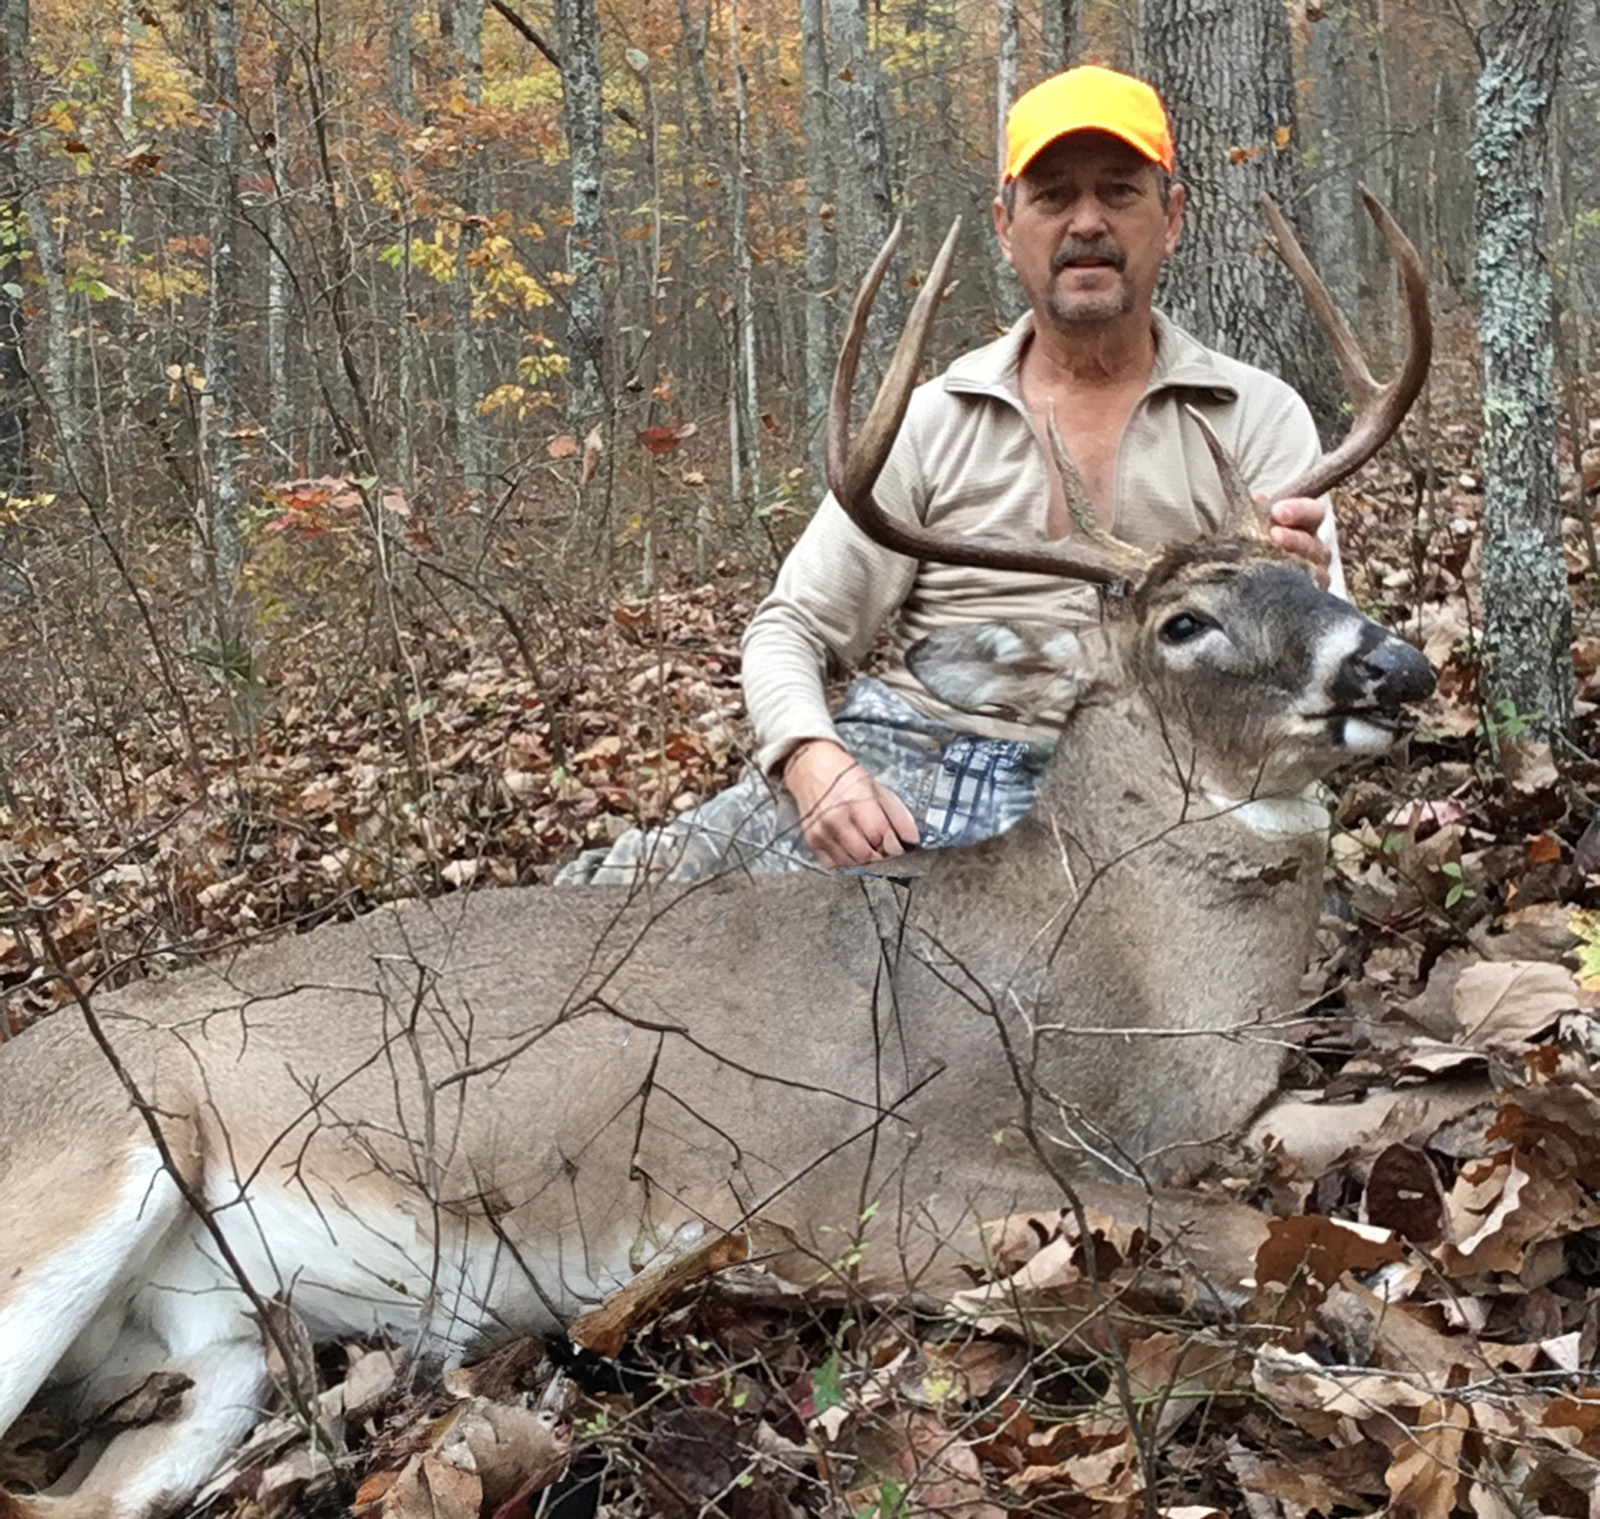 A photo of a man kneeling behind a large whitetail deer buck that's lying on the ground after he shot it.